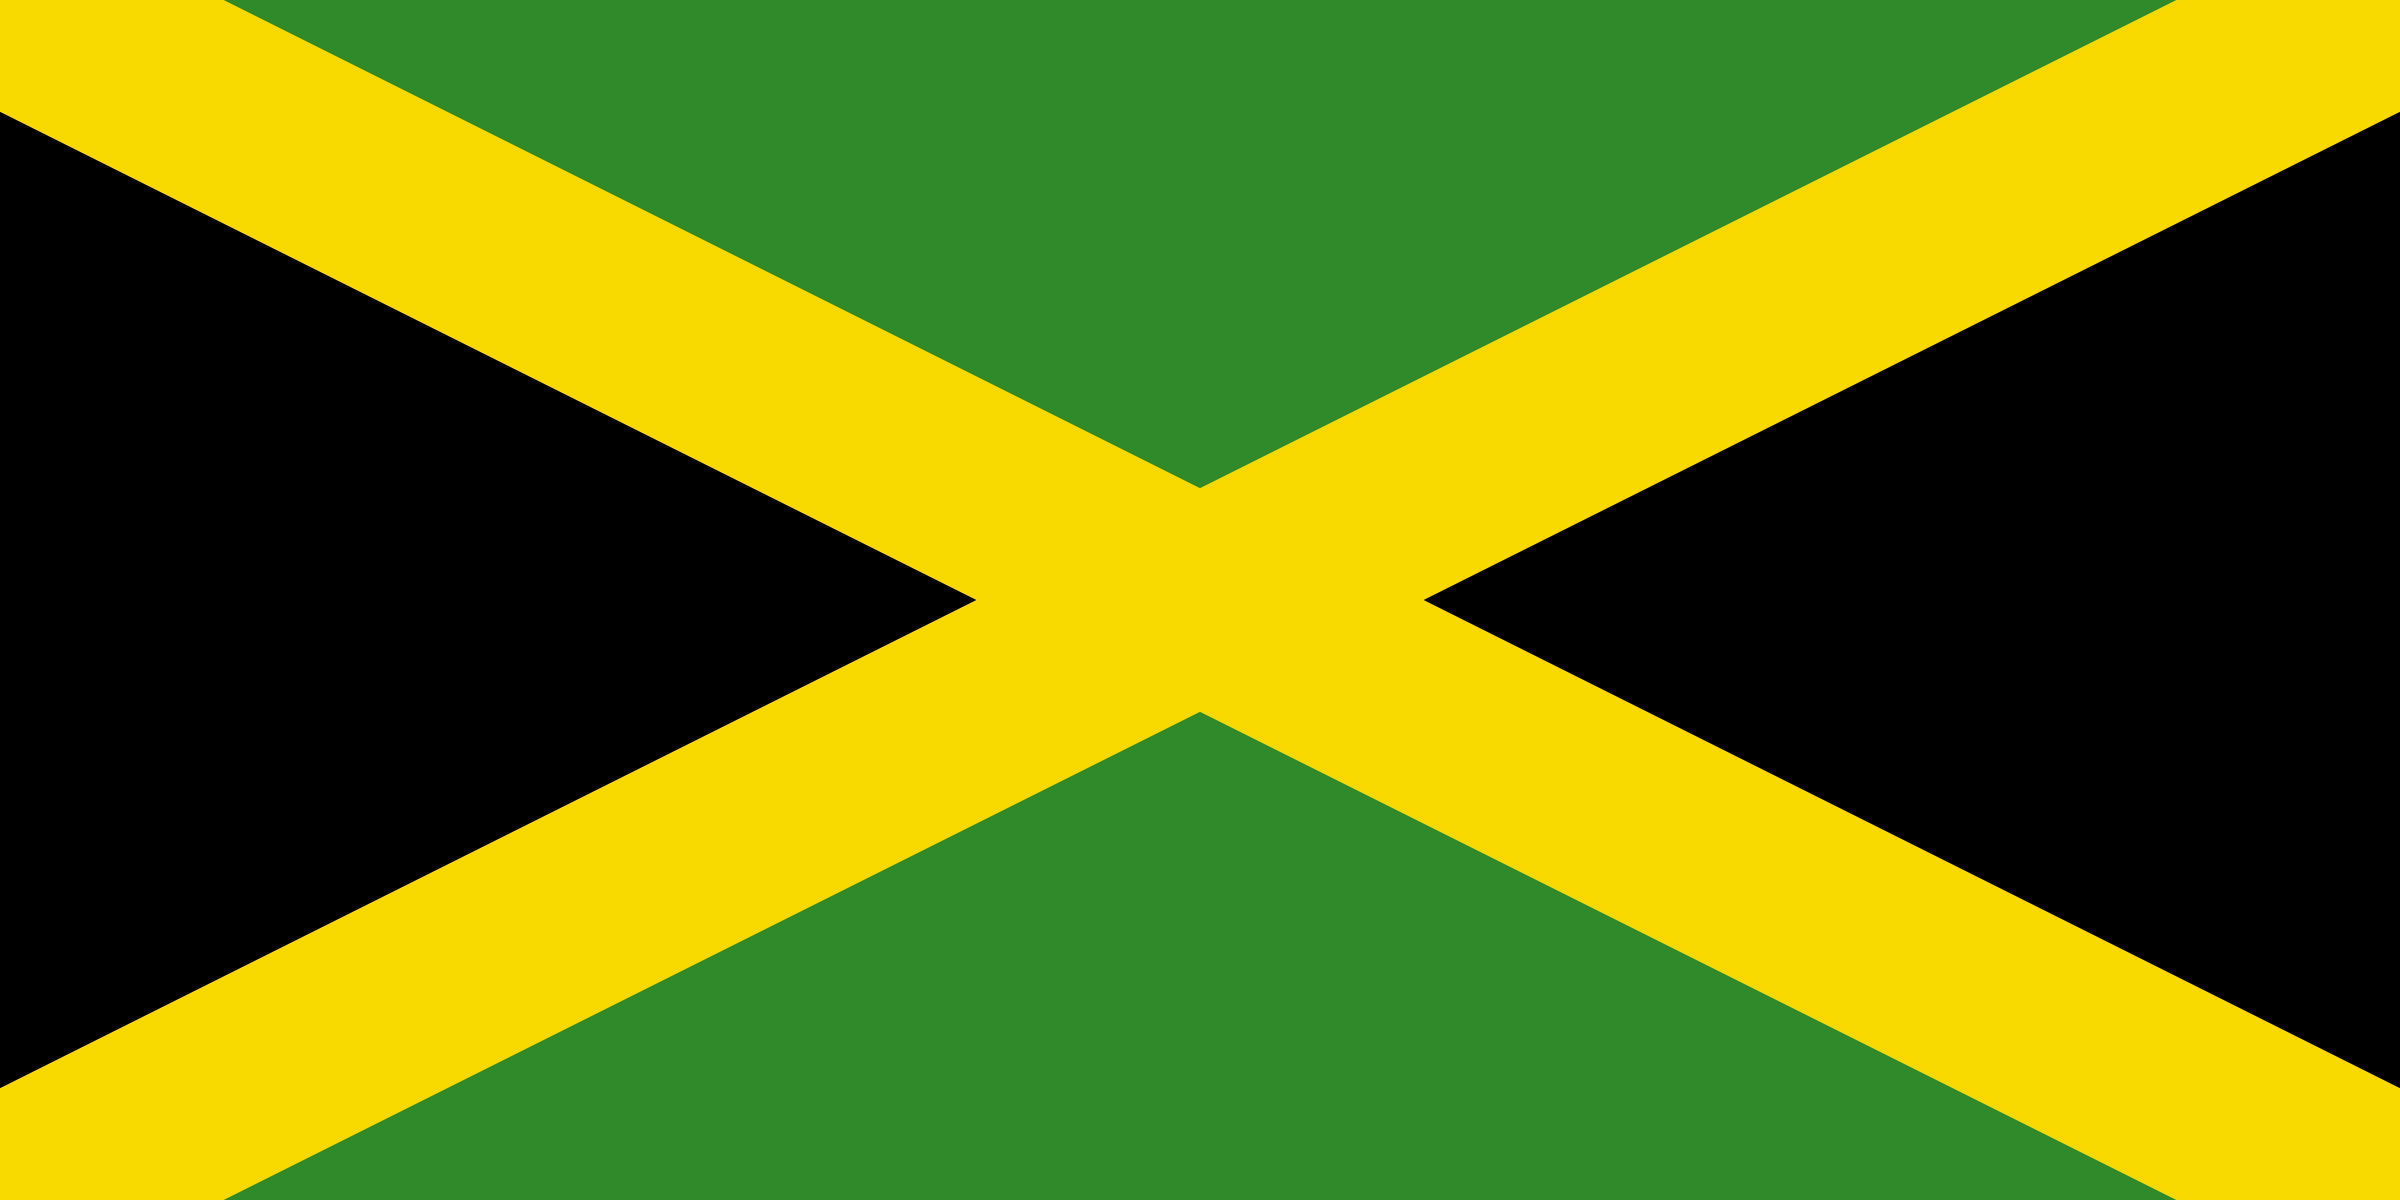 the image shows the jamaican flag